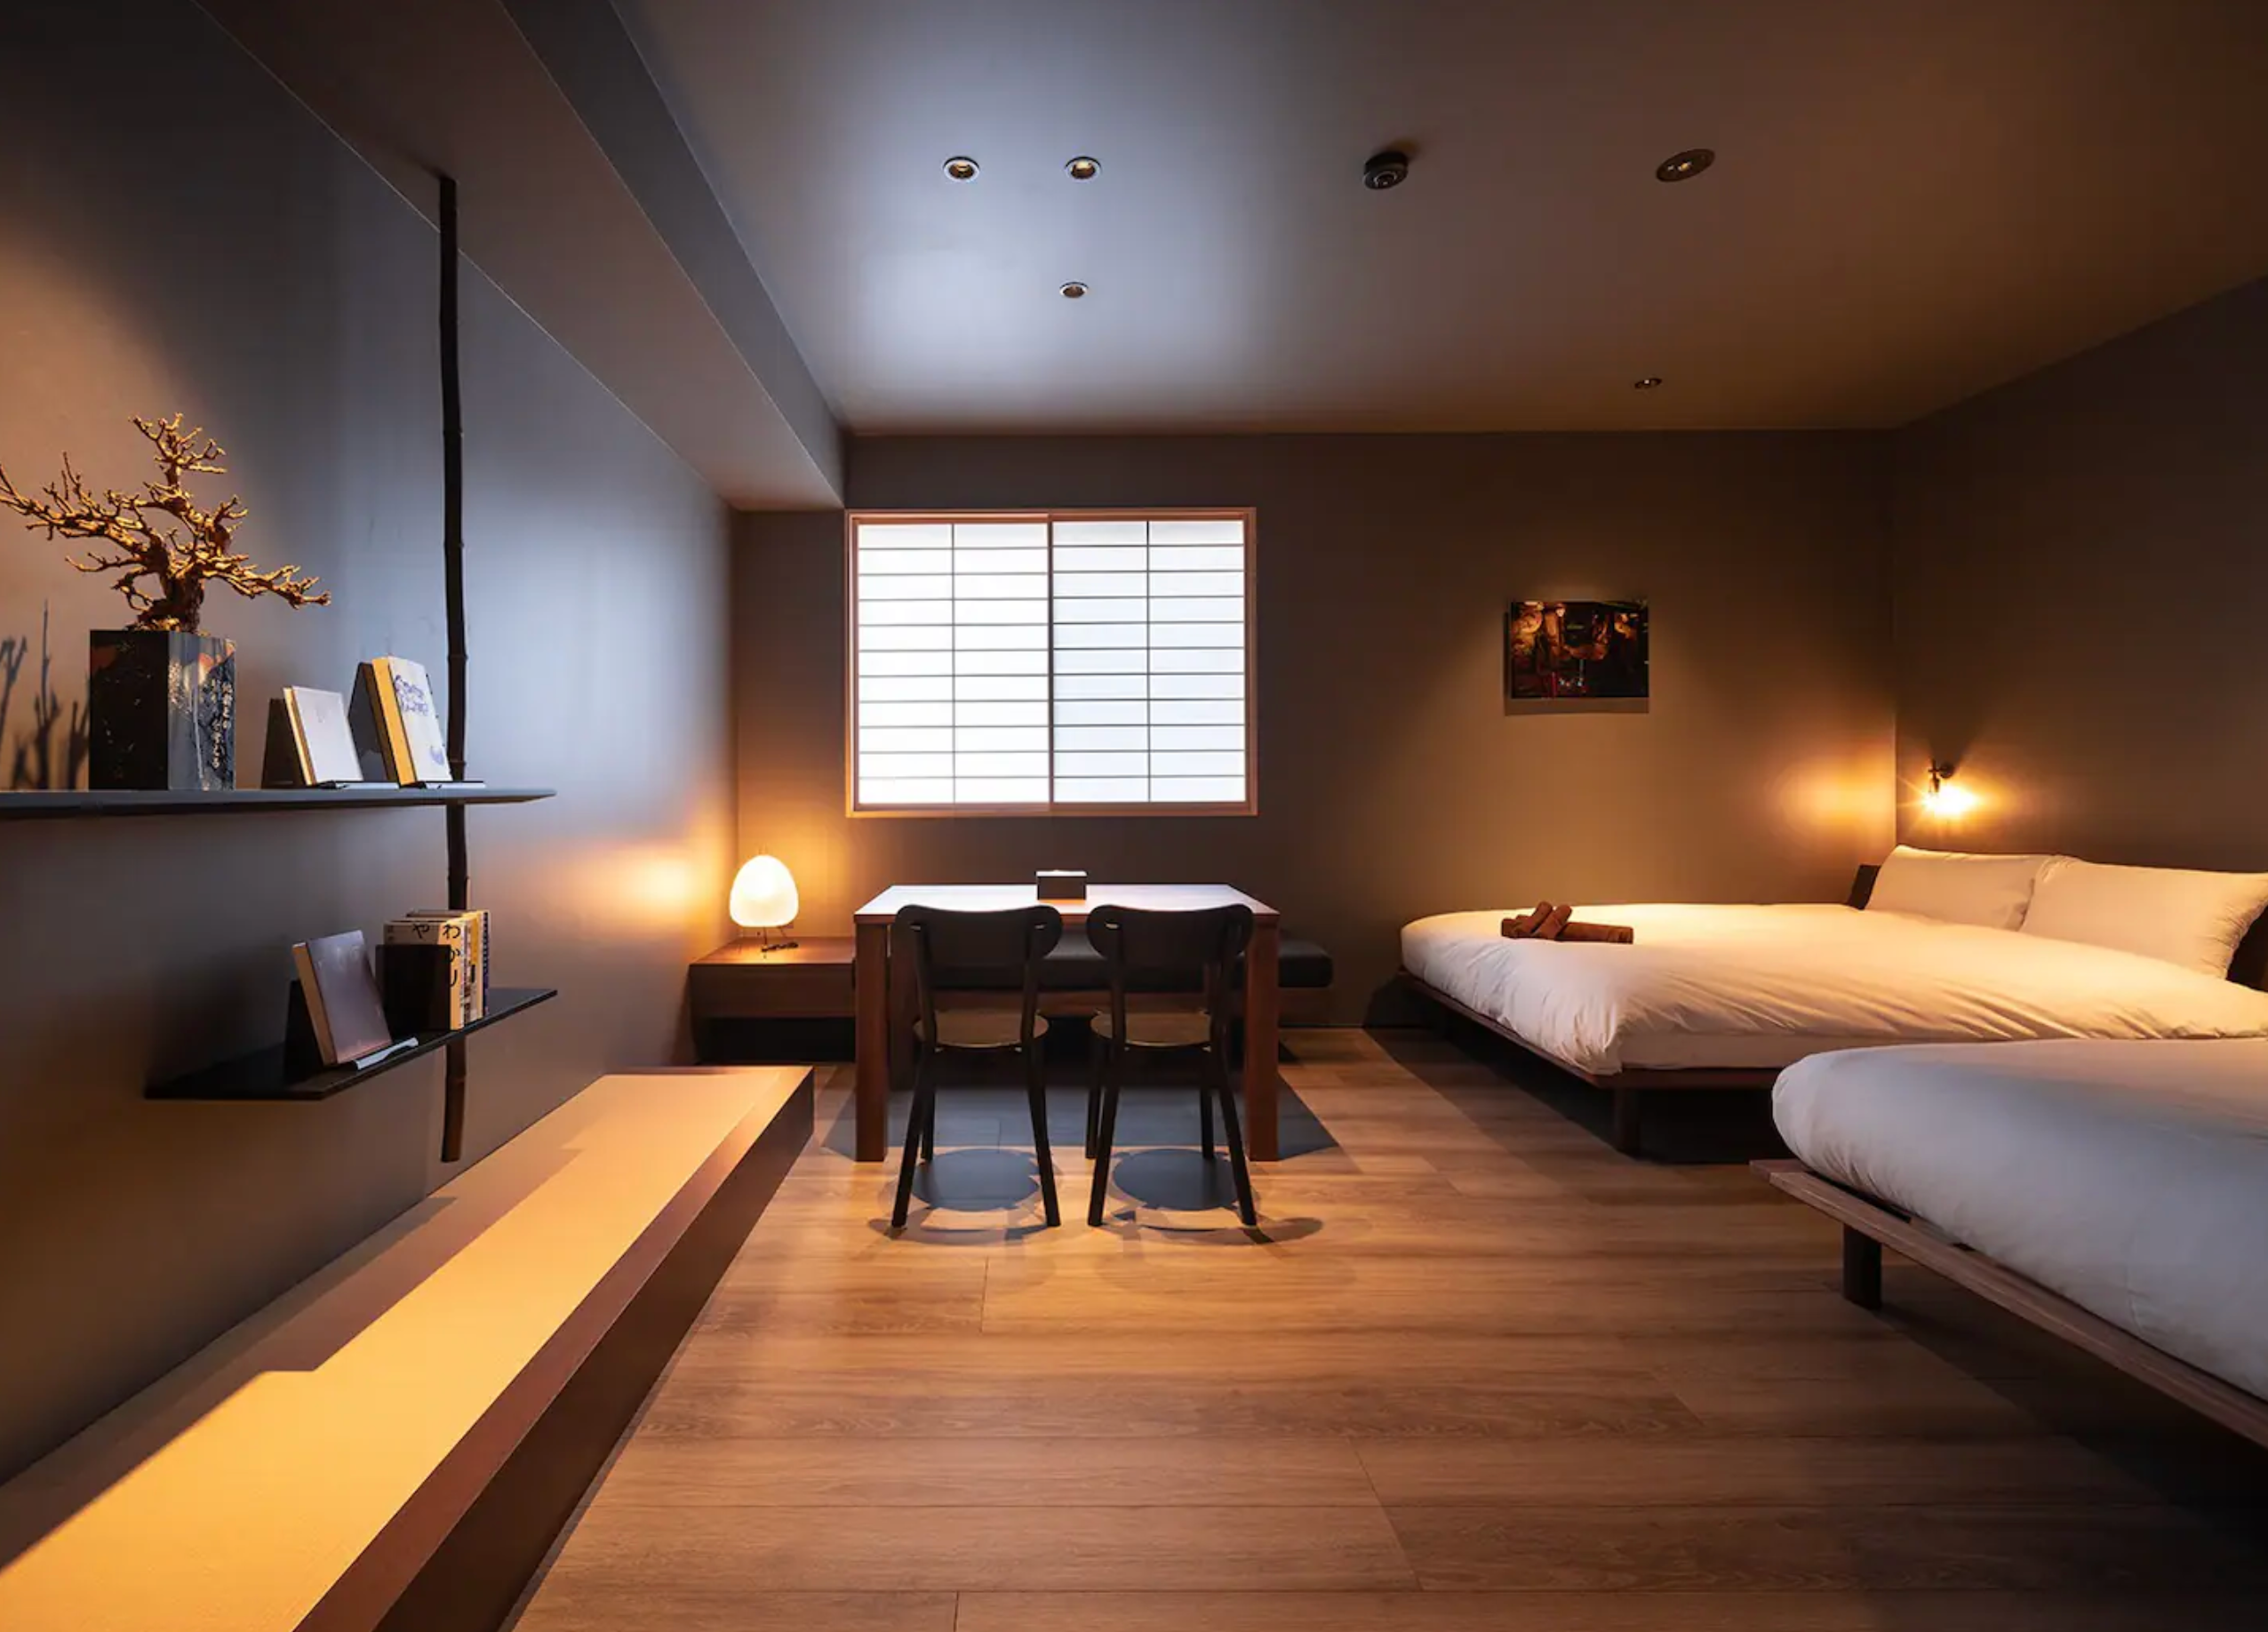 <p><strong>Bed & bath:</strong> Studio, 1 bath<br> <strong>Top amenities:</strong> Historic neighborhood, shared lounge space</p> <p>Check into this quiet retreat located in the historical Yanaka neighborhood. Named one of the <a href="https://cna.st/affiliate-link/9t8kf9Usx7ZyYpp4CapZ5KaeVa5XEHpBDNTBV2UwDnmTkfdLhGmjcLxJnnbhWtS89tA1xmQ88dAuFjmES4V4KEDbjWZdx9AKwuUn8oHKeCWupdBcW4onBrGXwgAtwwnPR8zmjHK8SGVTPWADkYJDK2Q2ND5Gq9SVQWnQfNoW4ZrYBr5mkXN6NEVXGKqWcWAZ4BL9ZghkZcWVSm4BS82LFvEQDDVyNHCGb1ZQoGqrZ9vLATww6kpQKkrLgFA2SaYKobLmdW5Zz7asaPVNfpc8r4ch5mvvjVYd4NSBJsLTcZ2WL5sR14mDLLkQu2jzdaaCotJkM7gknyWc2RZQ9x7caDHwCTzNgkdbKtsswmbs2ZA9MQuBbs88hjGmbFh2moEbtpYR4hUC" rel="sponsored">Top 10 Most Wishlisted Japanese Airbnbs</a> by <a href="https://cna.st/affiliate-link/2BPJBD7rBsogDfQBZX1ALARTbGMhE3Ze87tqkLeDt6rvJZNZH6BdfBd6RUUdU9TwXTfoBd9FgVqxz8wwre56meUcBzECo19pVxz1syHMZPDV674G2FkK2g" rel="sponsored">Airbnb</a> in 2022, Yanaka Sow functions as a hotel and rental property. A former center for major events in Tokyo’s history, including the World War II attacks, many of the original structures of yesteryear still remain intact on the streets just outside—like their Edo period houses and variety of temples. The two-bed studio features a full kitchen where guests can prepare their own meals with a stove, kettle, and large refrigerator. A shared laundry area and lounge space are also available. Work by Japanese artists adorns the walls. UENO park is nearby, alongside a number of bars that dot the narrow roads; the Nippori train station is just a seven-minute walk away.</p> <div class="callout"><p><a href="https://cna.st/affiliate-link/2uxxCQ7Rfr7UbY81Z3FnBafdqPBY3GRqSxsAHWCo9iGCvJNhBcsSWhndBYcBwkCxW5zrkGs5xG3hx5qJXnBSnKbozmbdgpGXxzbhxJrugJWukxX2wzXguNPAKKRWdUB95foDGqiYg" rel="sponsored" title="Book now at Airbnb">Book now at Airbnb</a></p> </div><p>Sign up to receive the latest news, expert tips, and inspiration on all things travel</p><a href="https://www.cntraveler.com/newsletter/the-daily?sourceCode=msnsend">Inspire Me</a>